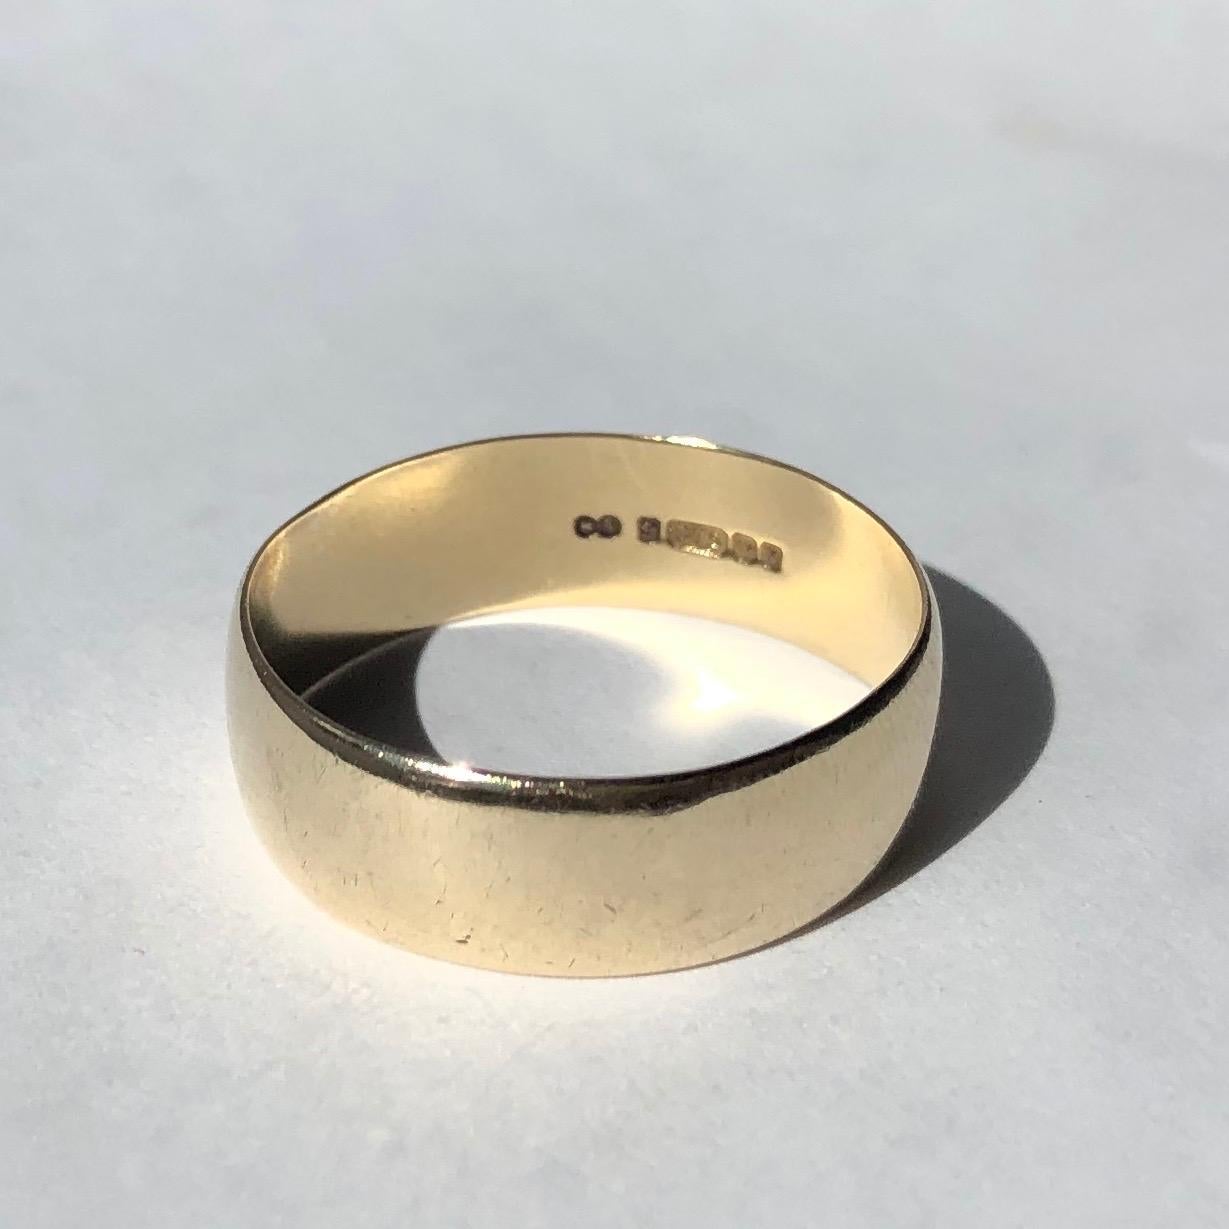 This band is plain and modelled in glossy 9ct gold. It could be worn as an every day ring or a classic wedding ring. Made in Birmingham England. 

Ring Size: Y or 12
Band Width: 7mm 

Weight: 3.99g